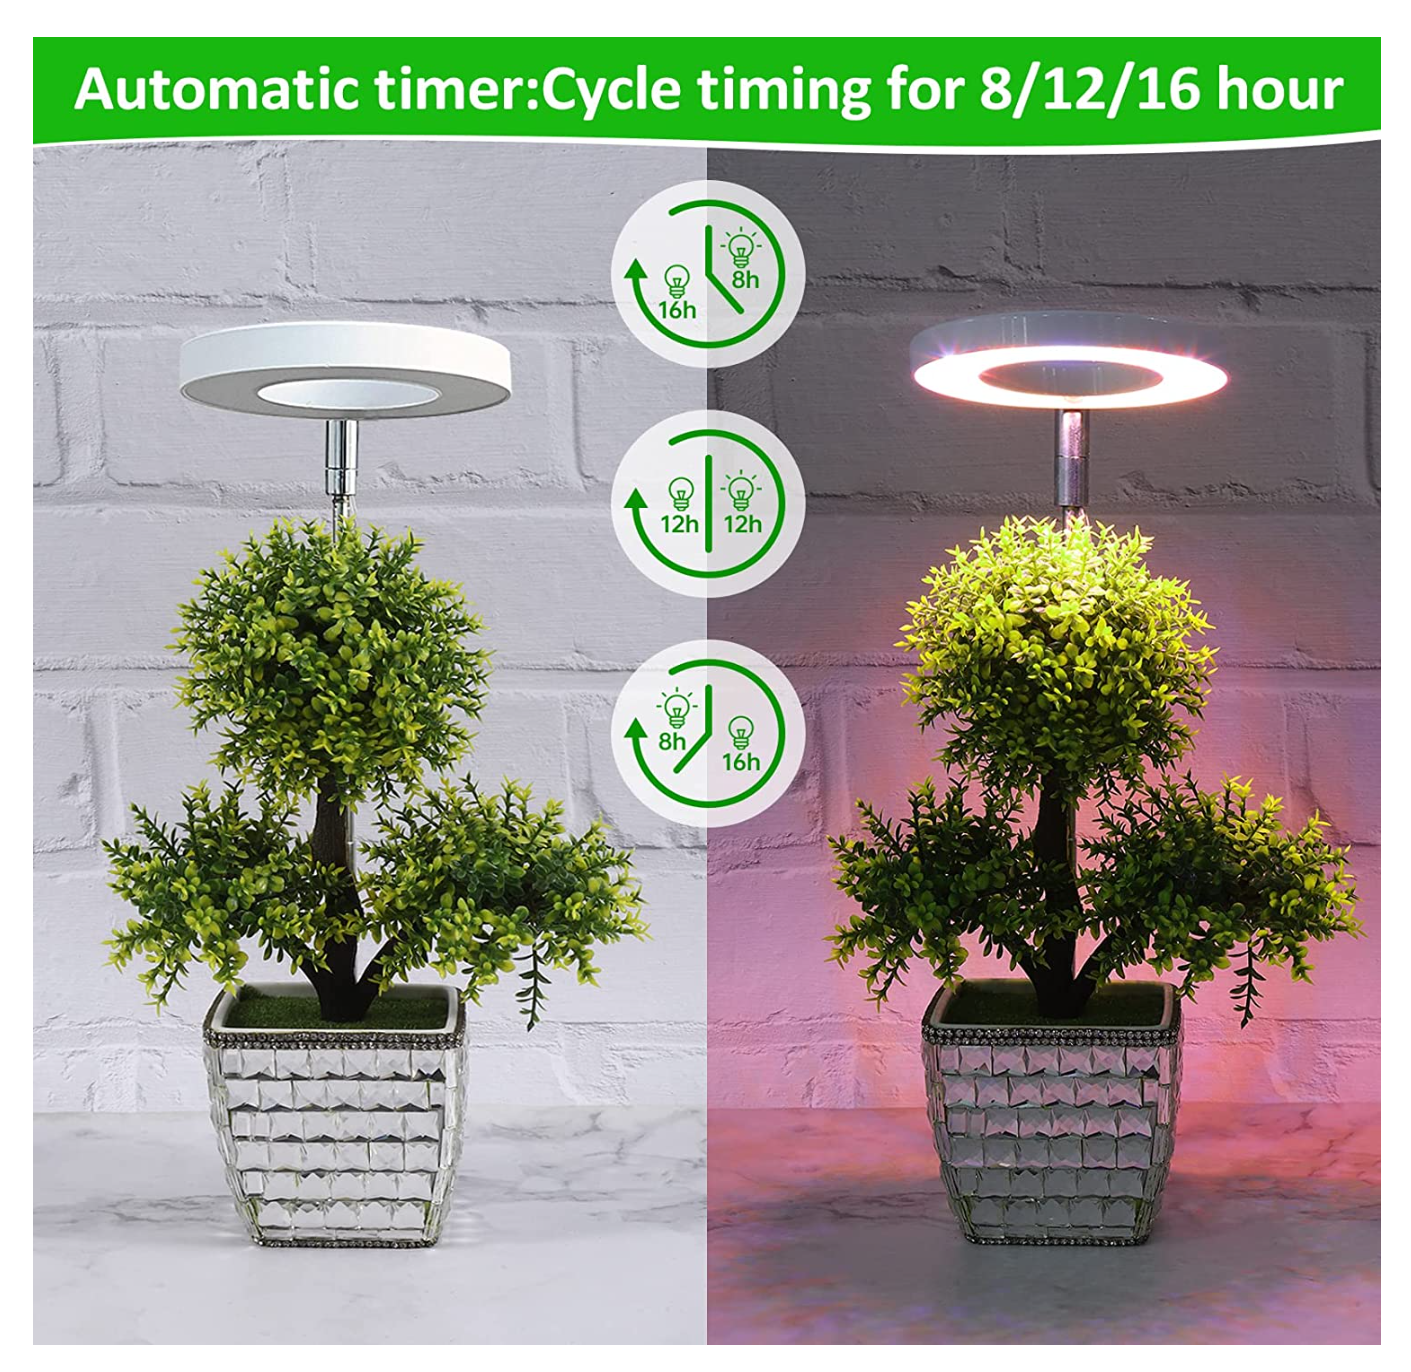 Full Spectrum Sunlike "Grow Light" for Small Indoor Plants - 10 Dimming Levels & Adjustable Height